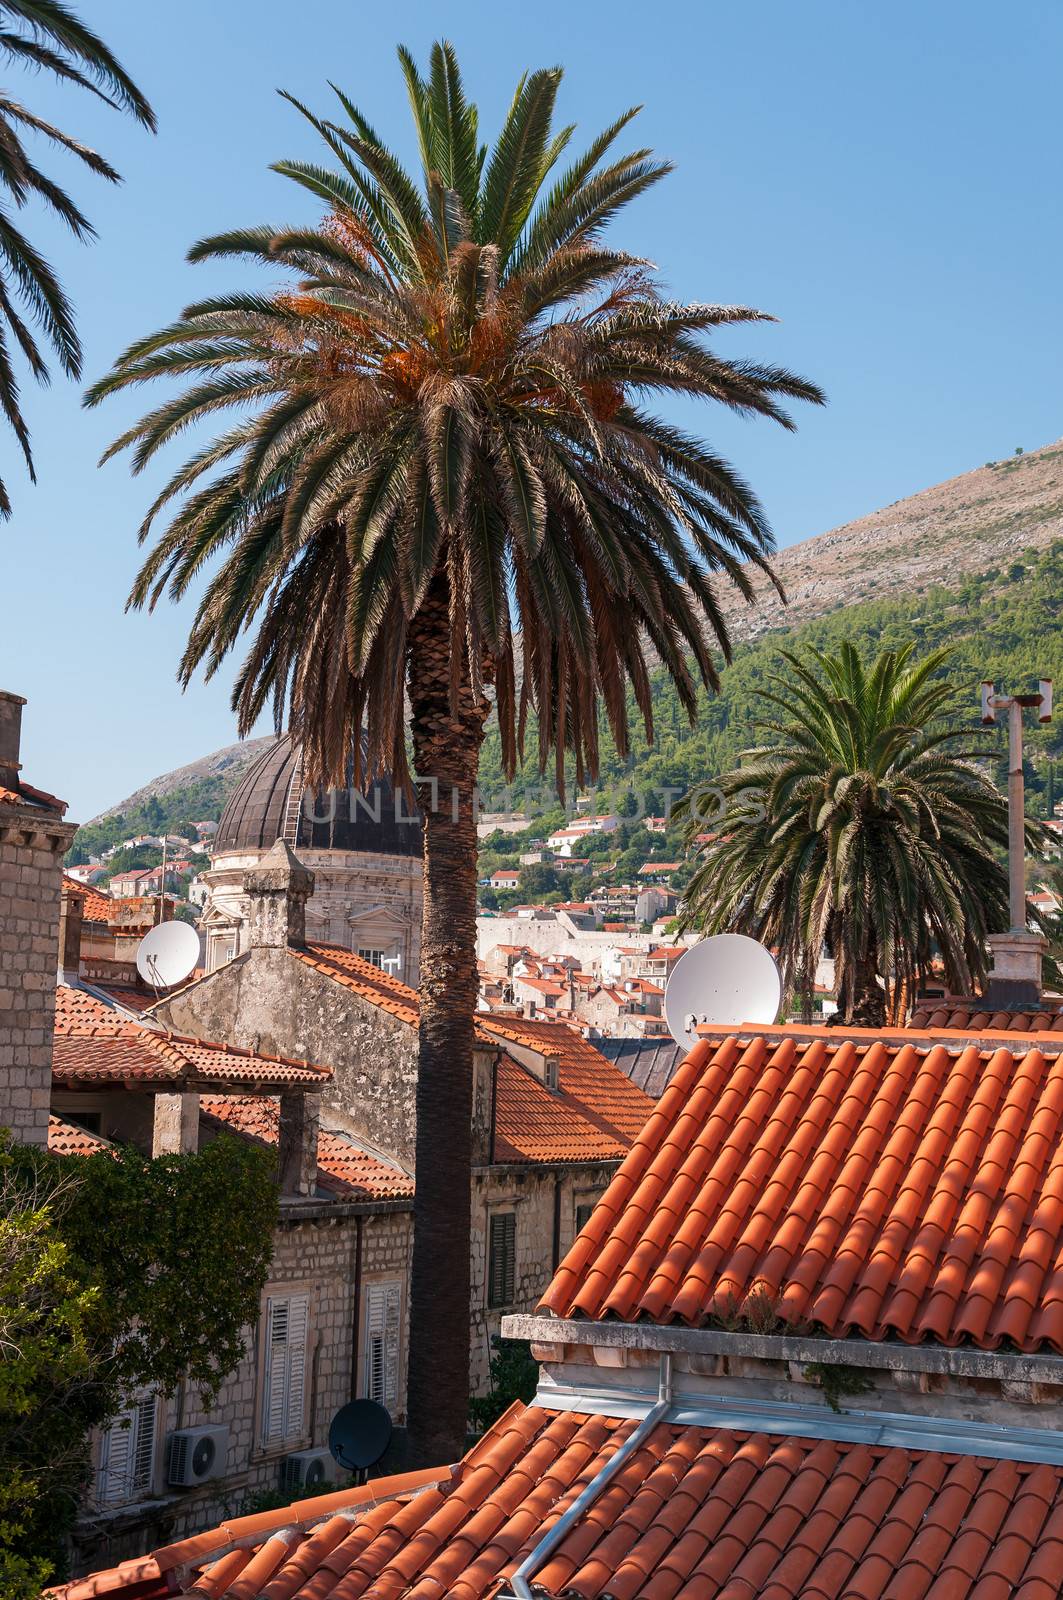 Palmtree in the middle of Dubrovnik by mkos83